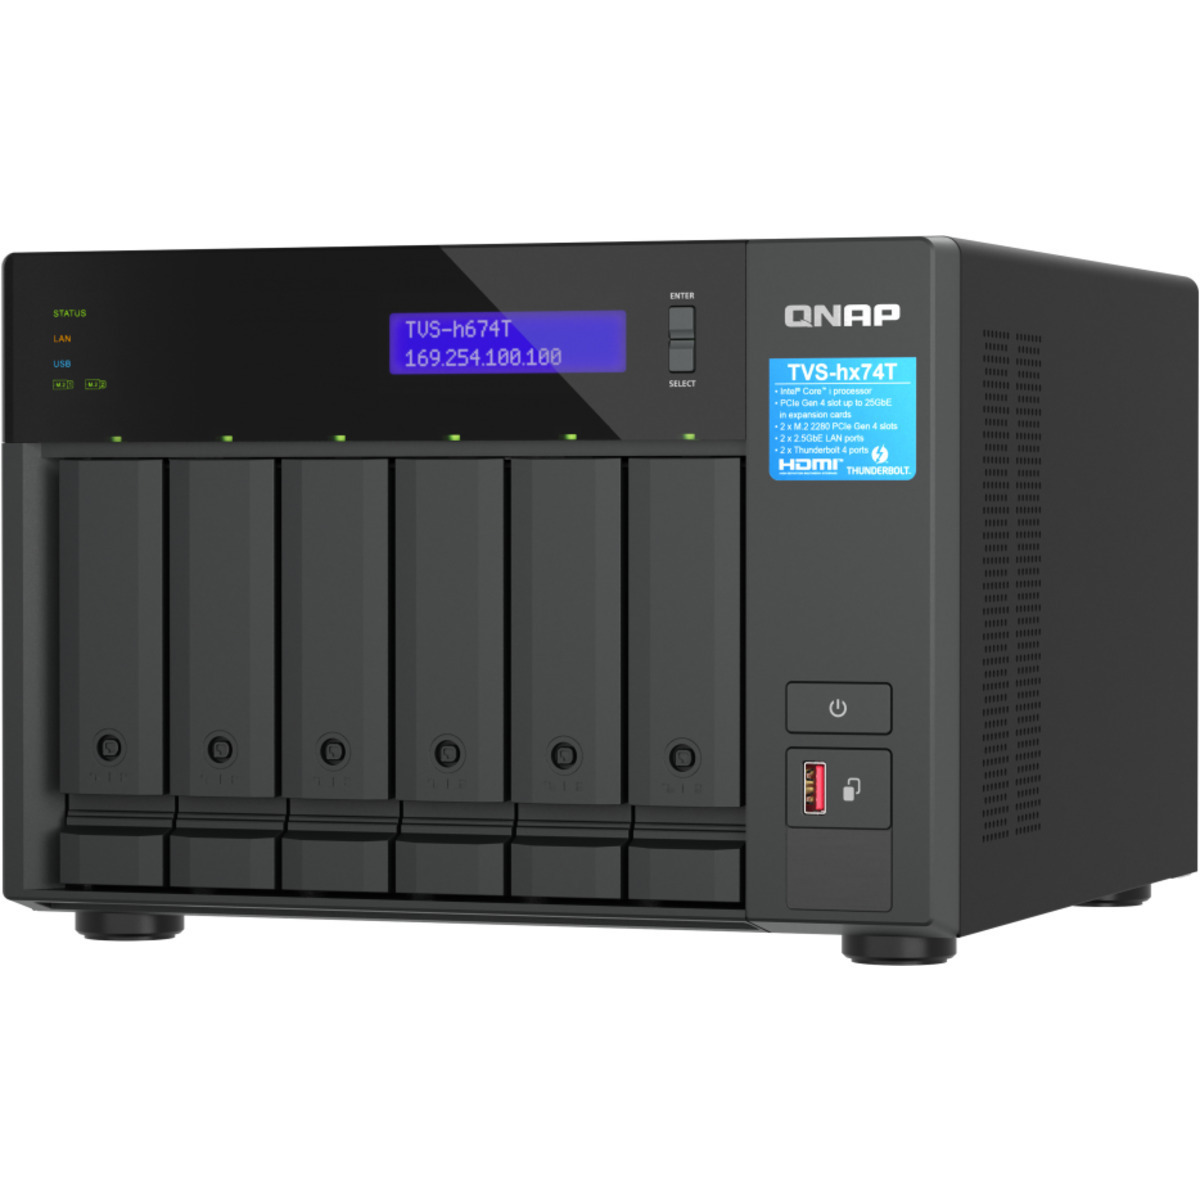 buy QNAP TVS-h674T Core i5 Thunderbolt 4 6tb Desktop DAS-NAS - Combo Direct + Network Storage Device 6x1000gb Samsung 870 EVO MZ-77E1T0BAM 2.5 560/530MB/s SATA 6Gb/s SSD CONSUMER Class Drives Installed - Burn-In Tested - nas headquarters buy network attached storage server device das new raid-5 free shipping usa spring sale TVS-h674T Core i5 Thunderbolt 4